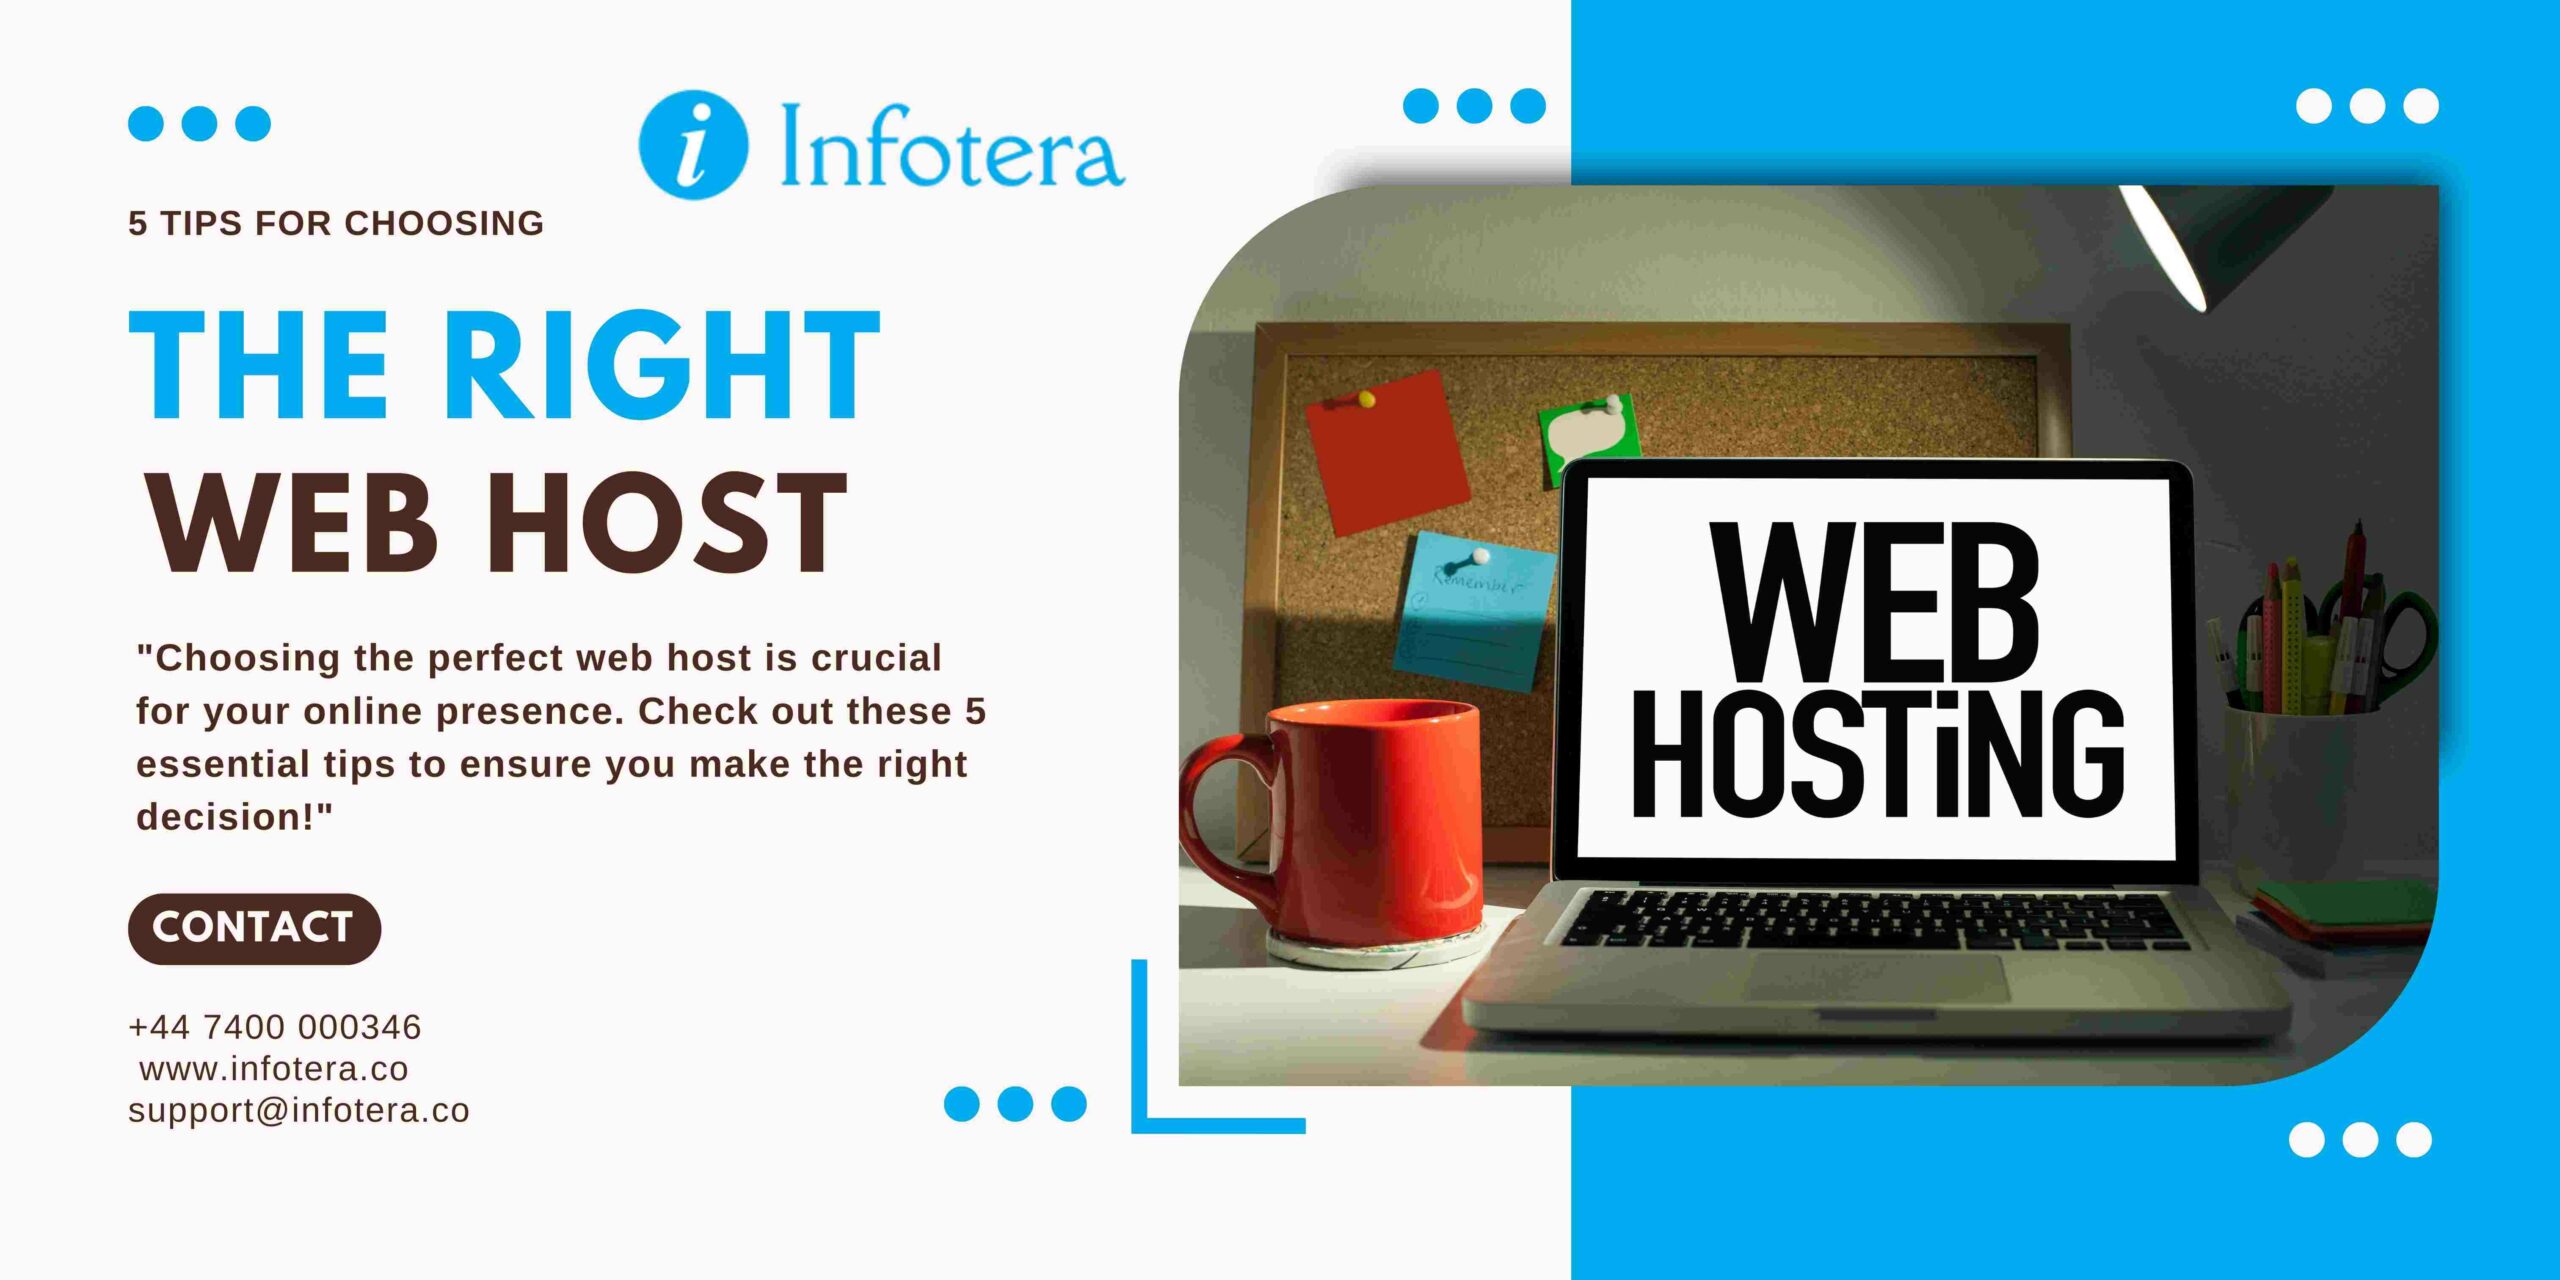 5 Tips For Choosing The Right Web Host